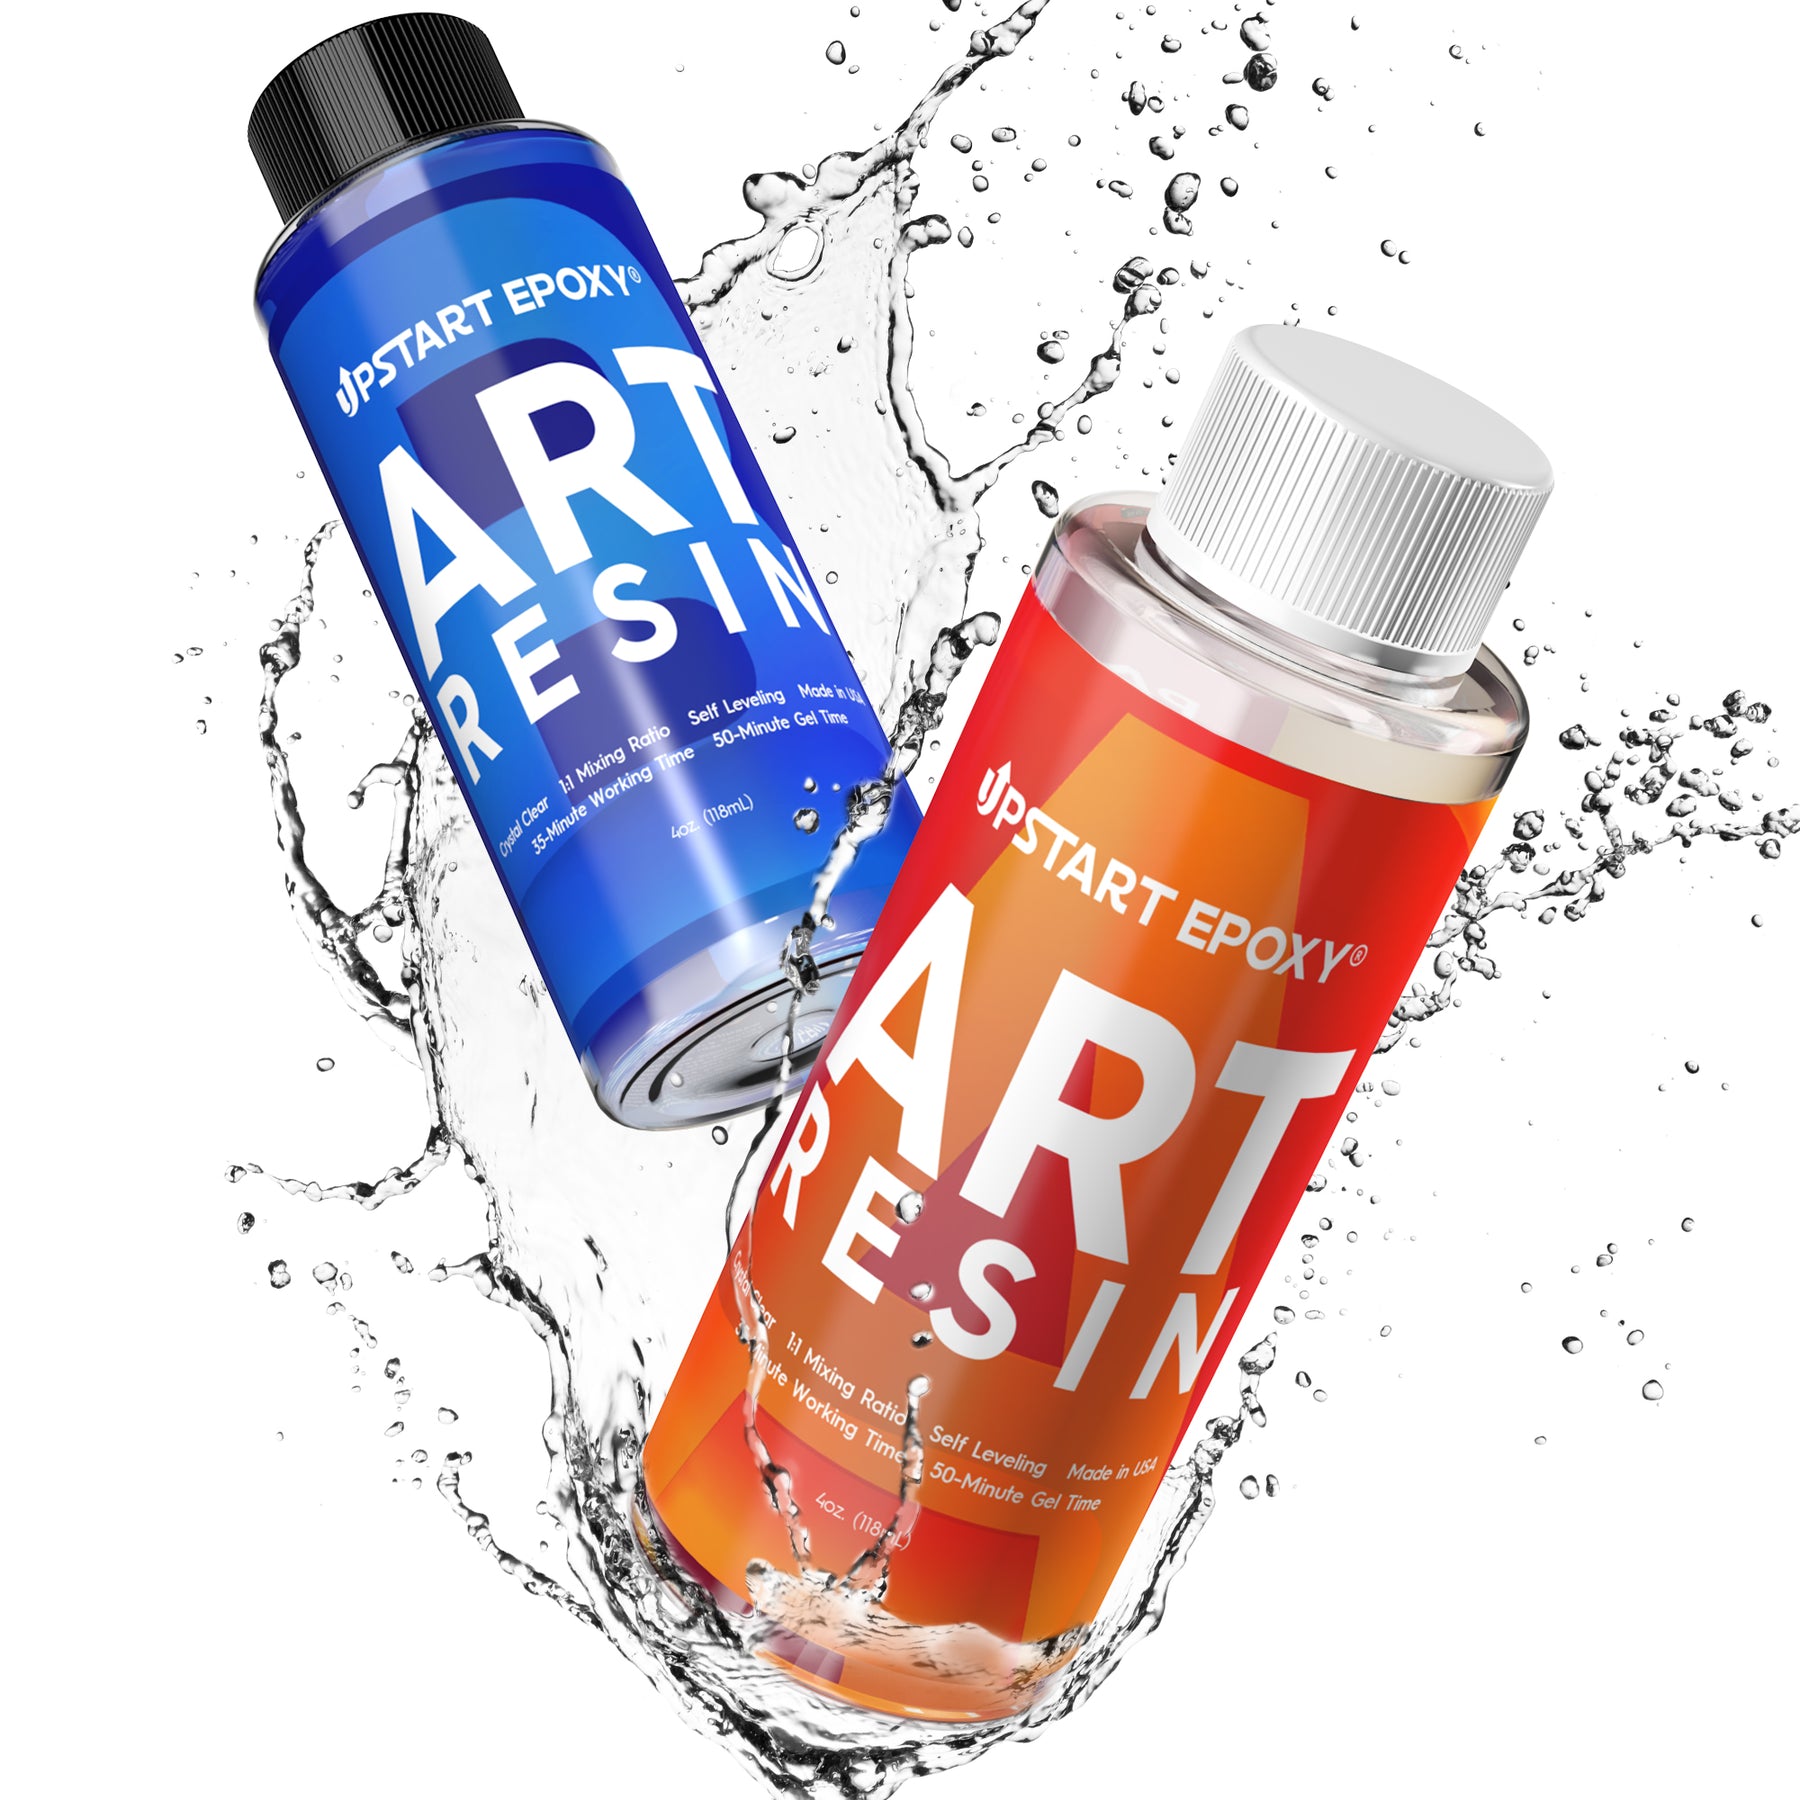 Casting Resin Vs Epoxy Resin: Discover Their Differences – ArtResin